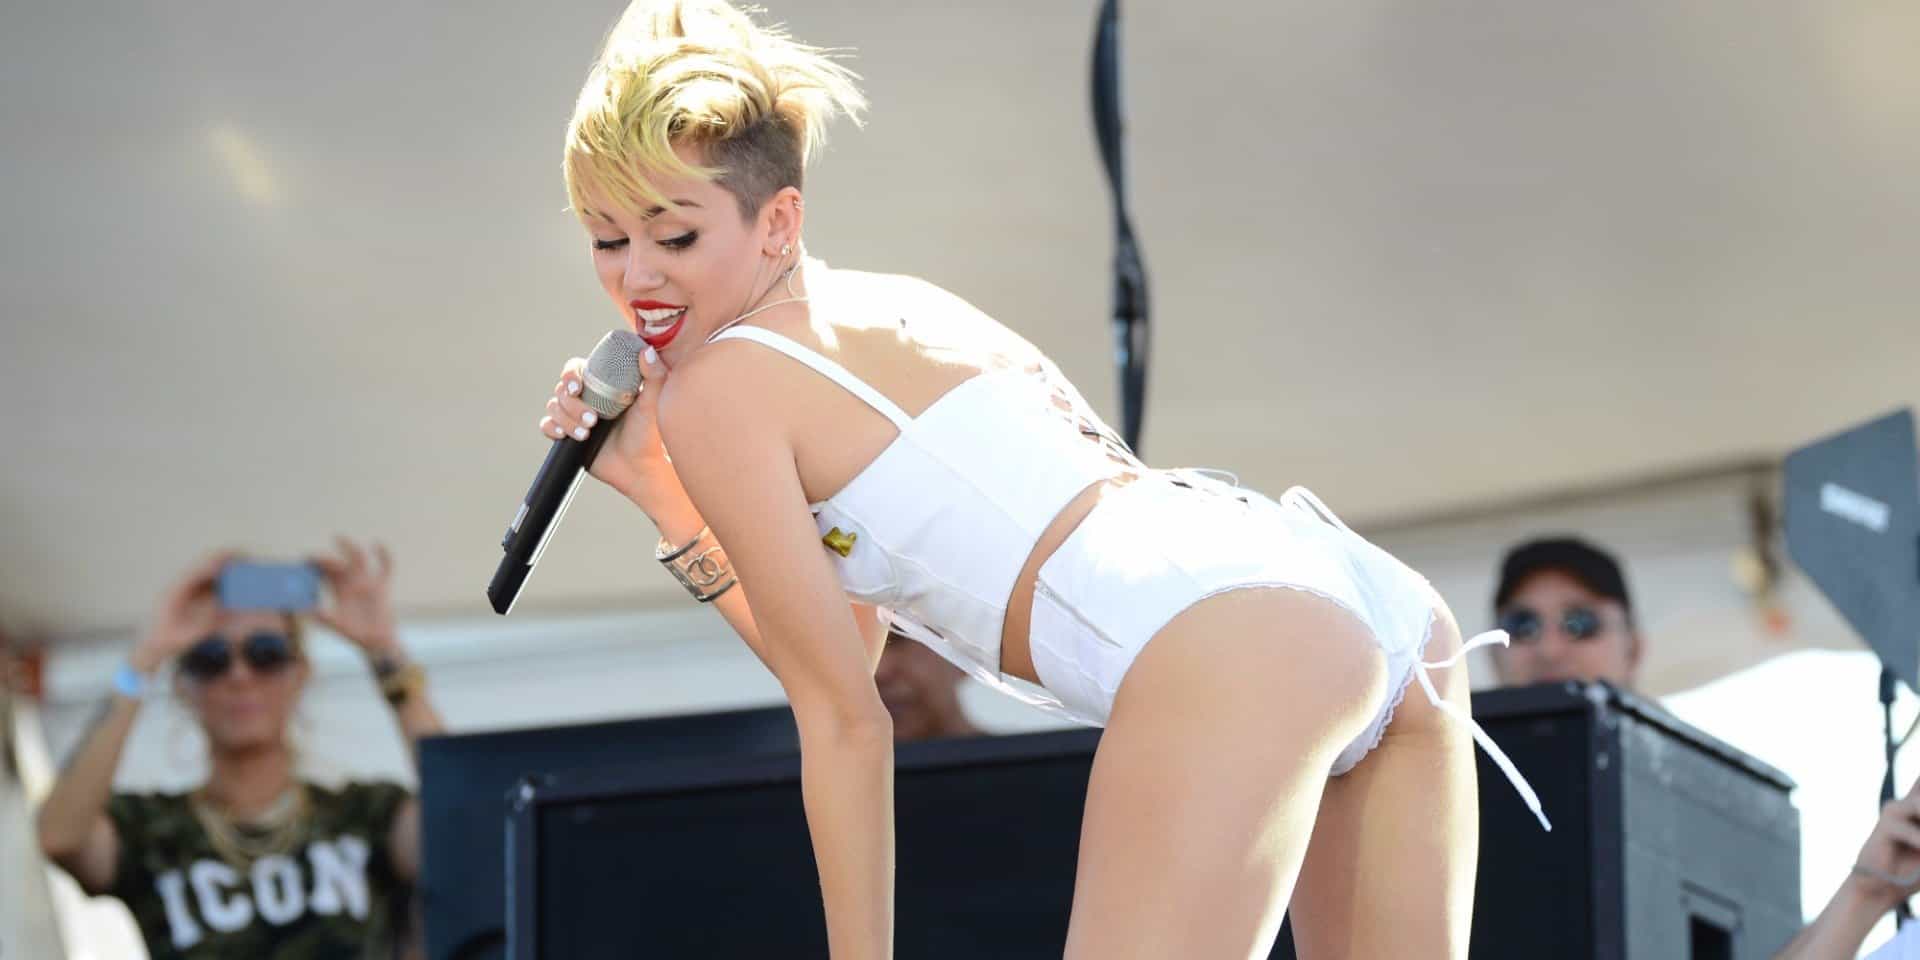 It looks like Miley Cyrus would be in a lot of trouble if she lived in Russ...